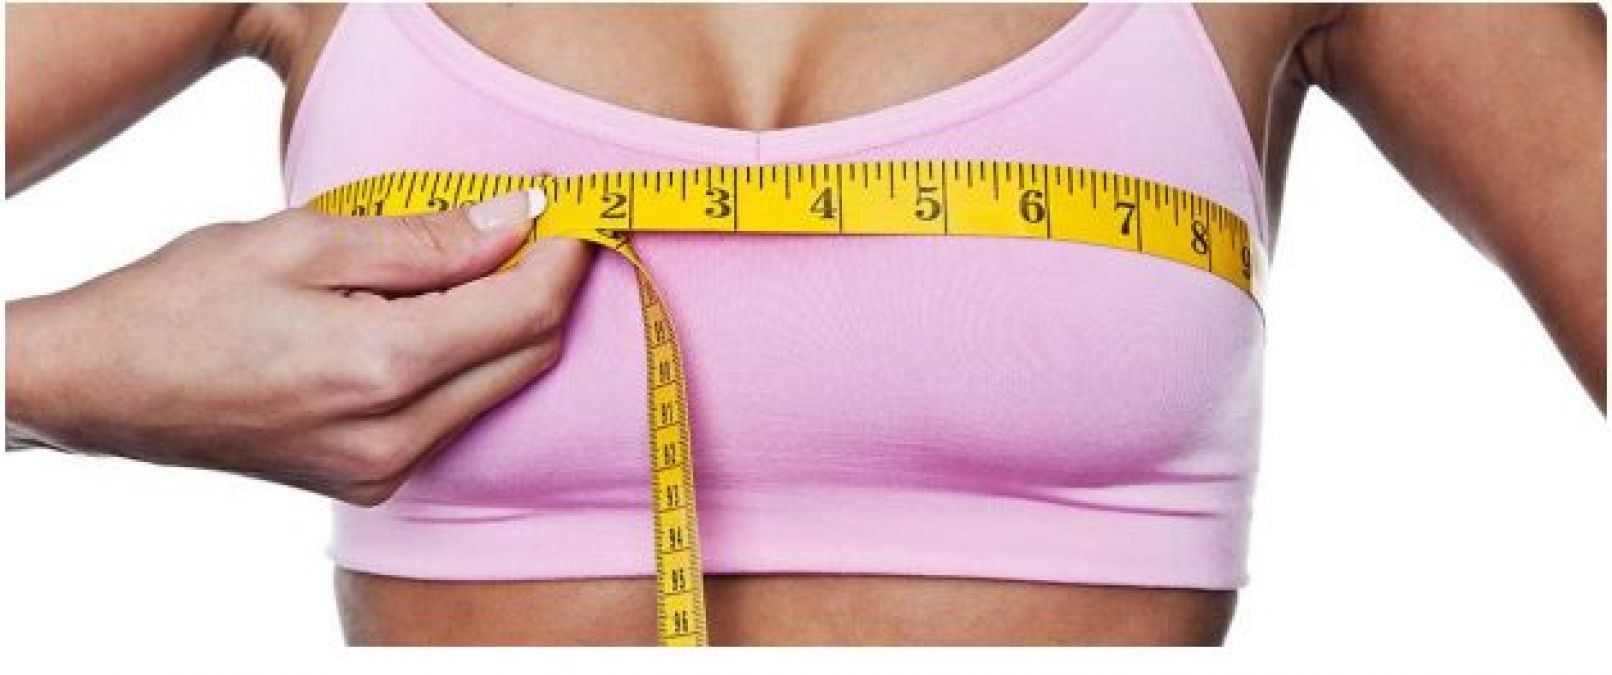 What is Breast Augmentation, and what is the procedure for it?